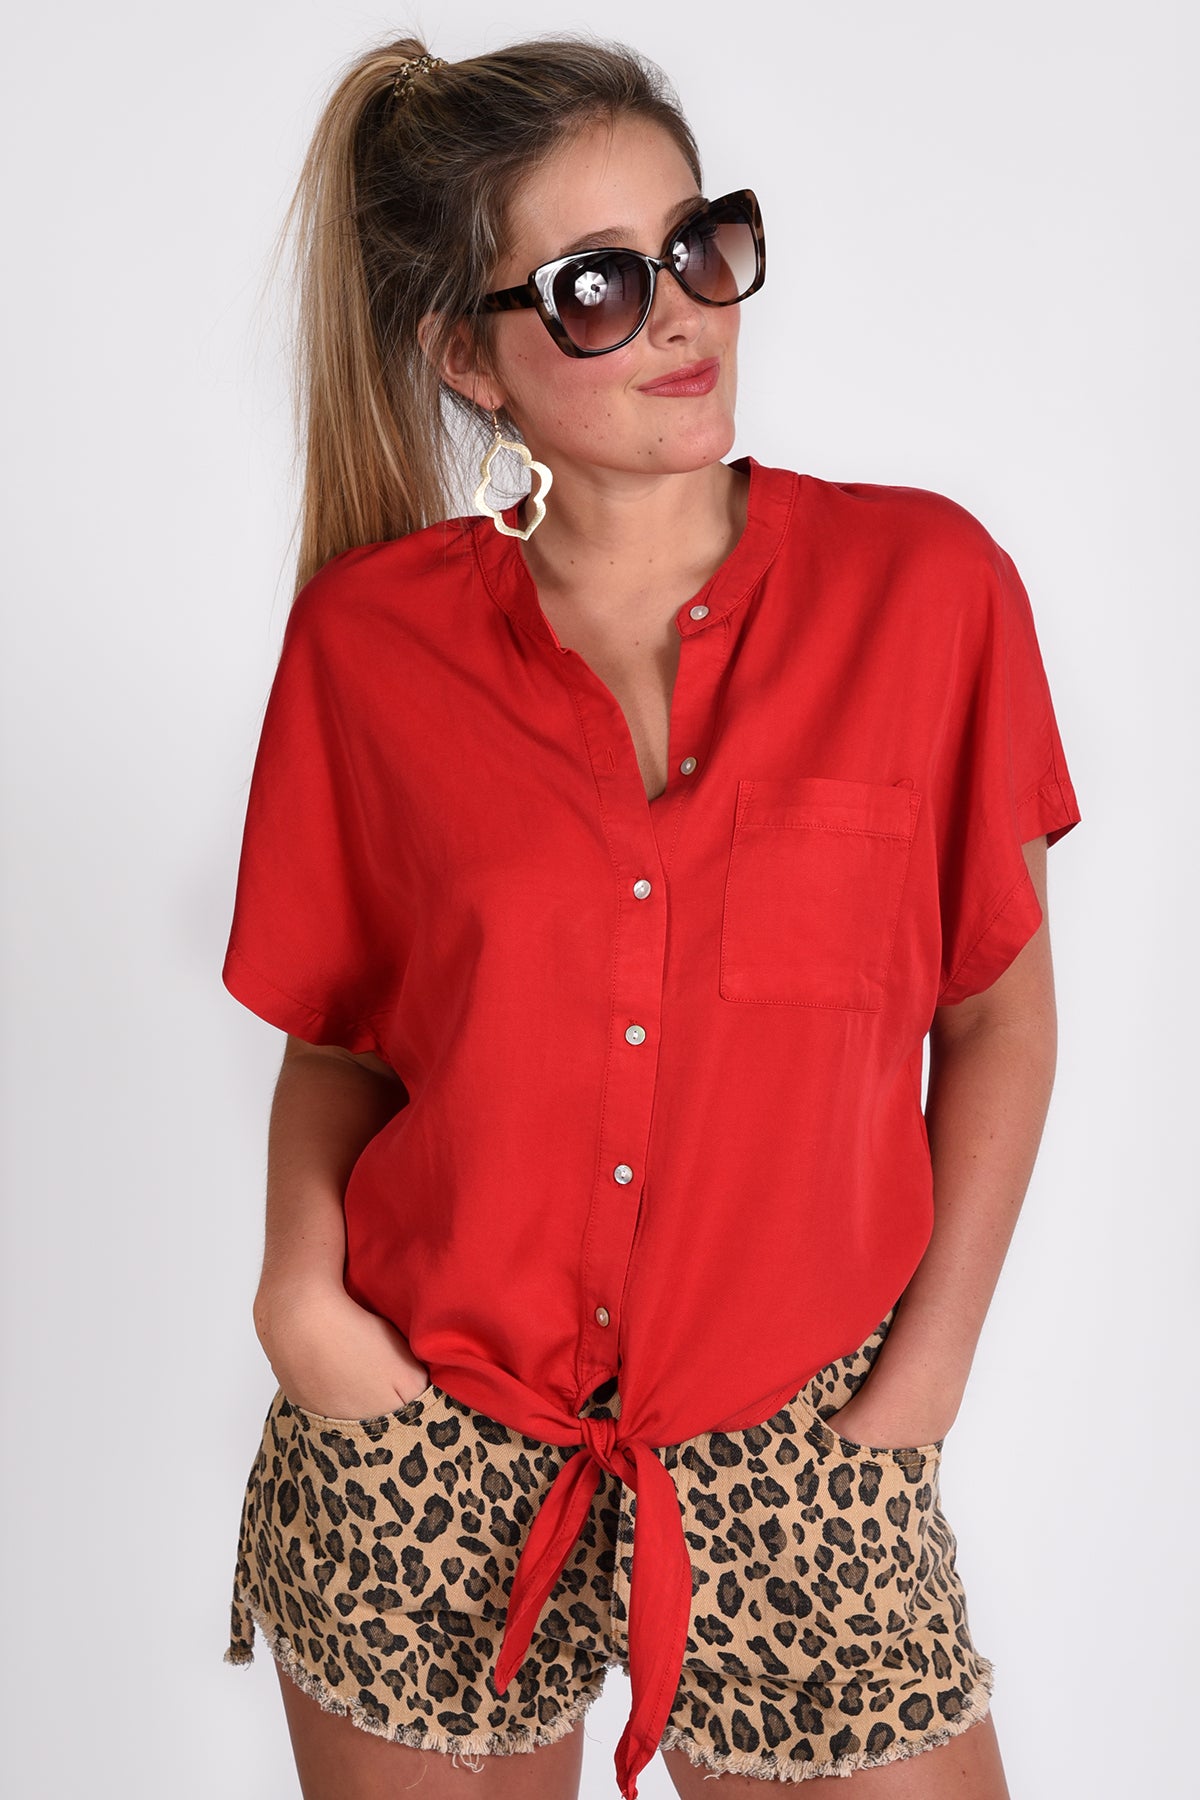 TELL THE TRUTH TOP- CHERRY - Dear Stella Boutique